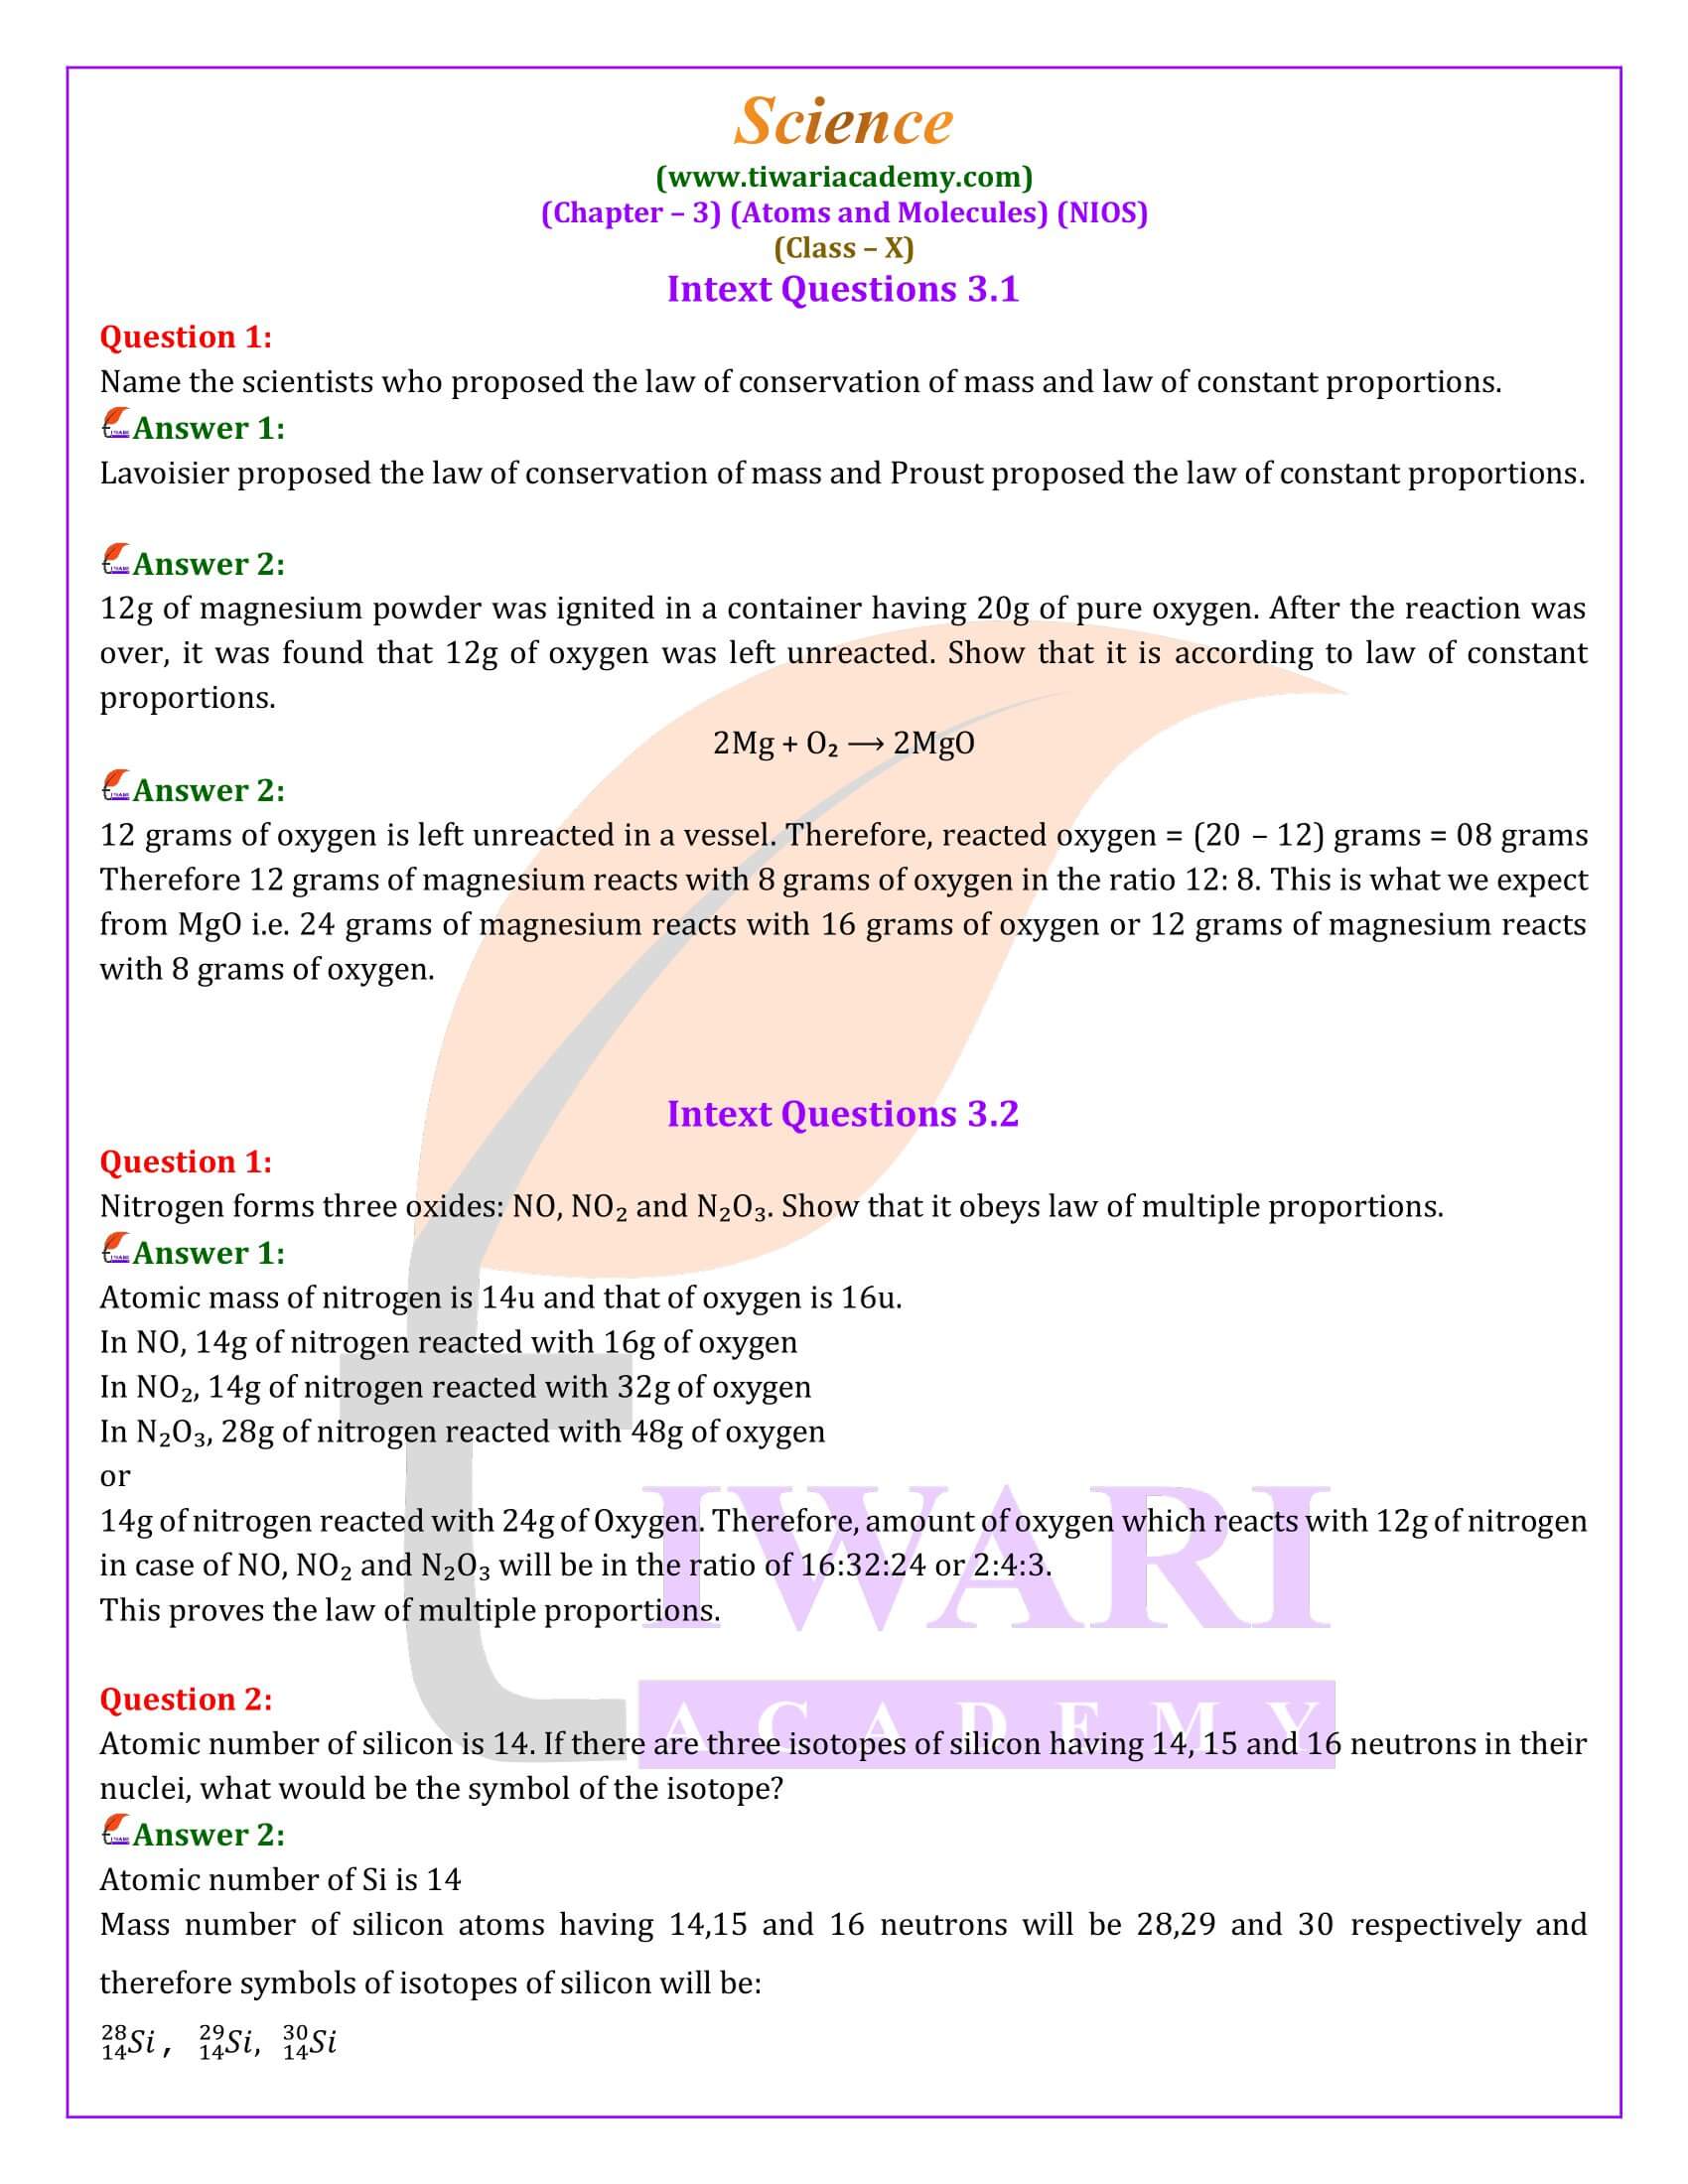 NIOS Class 10 Science Chapter 3 Atoms and Molecules Answers